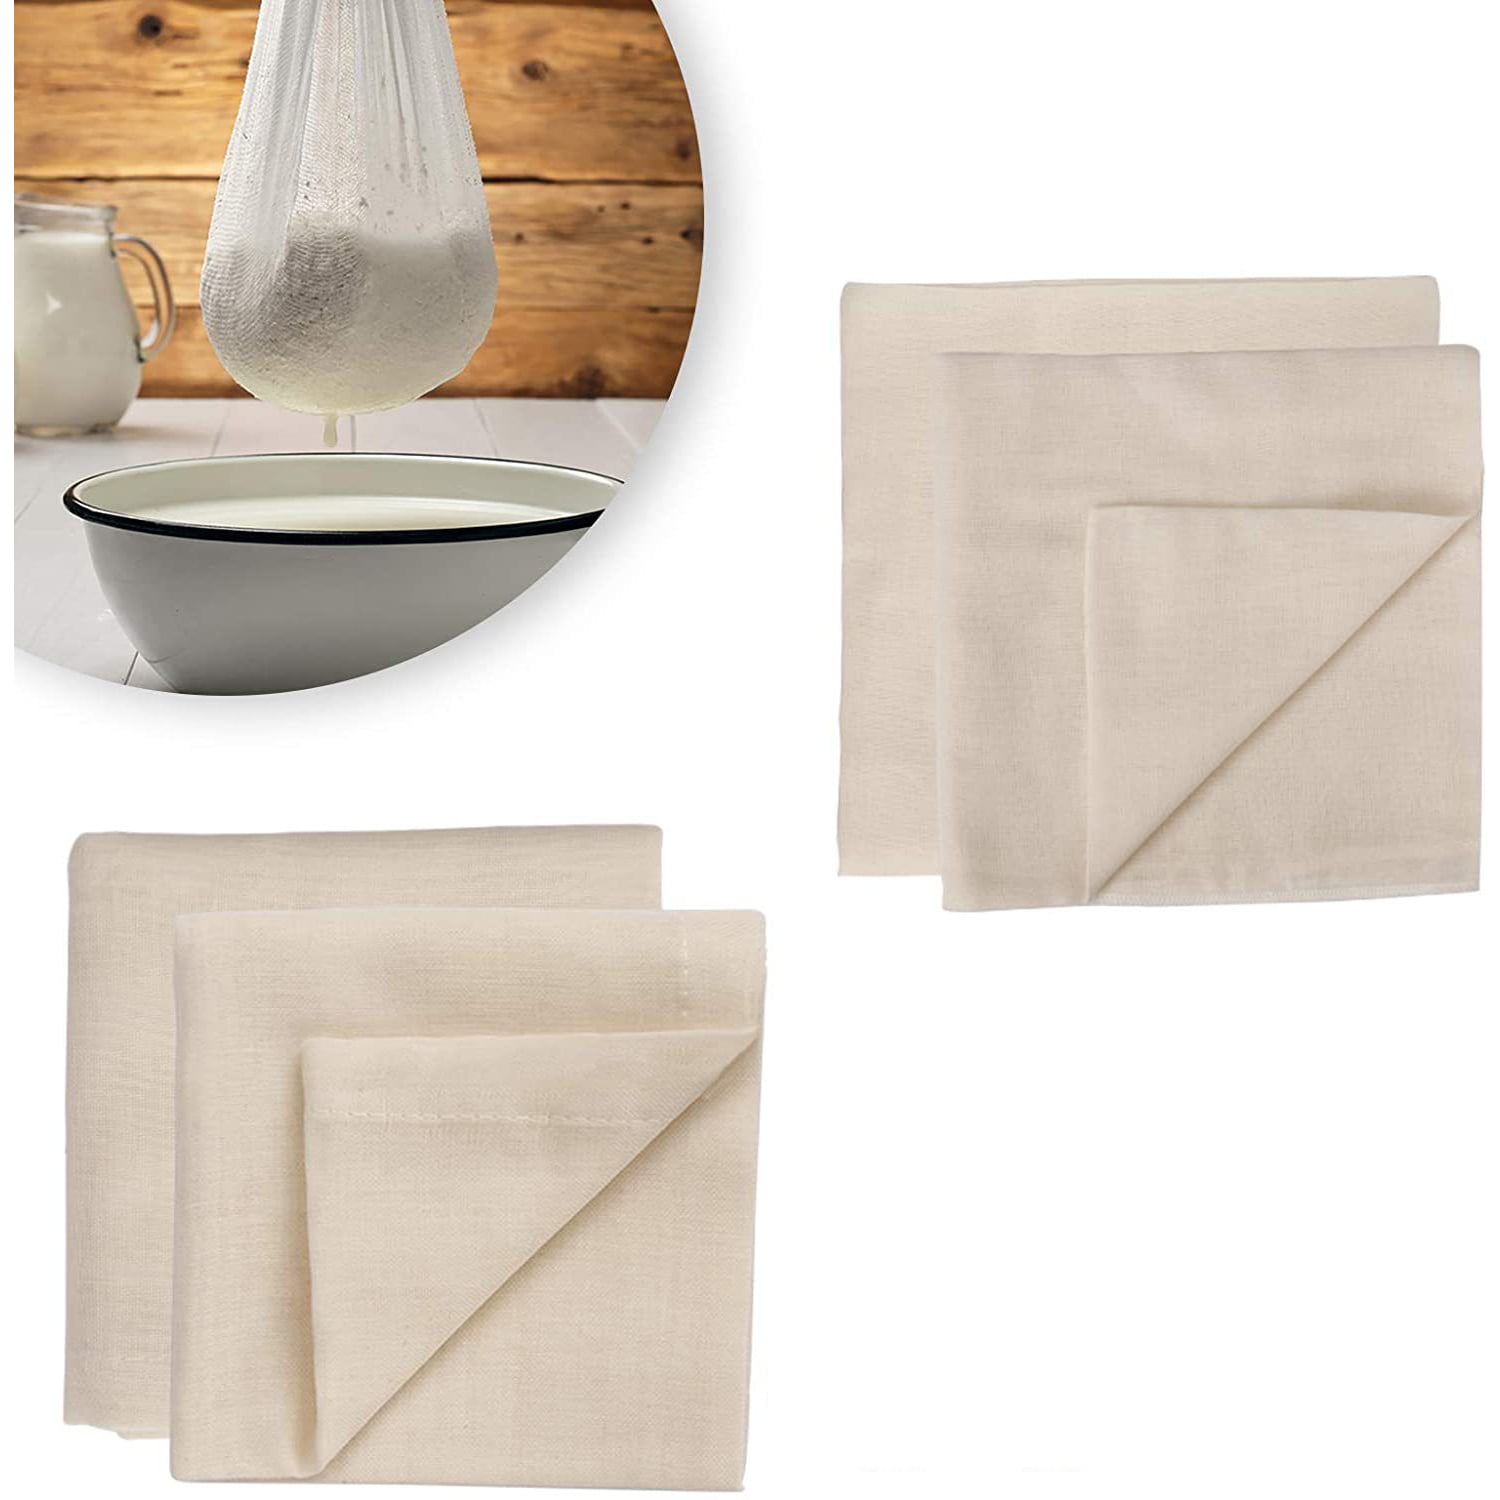 American Cotton Ultra-Fine Cheesecloth for Straining - 6 x 6.5 ft Length -  Reusable Filter Cooking Cloth - Table Dressing and Halloween Costumes